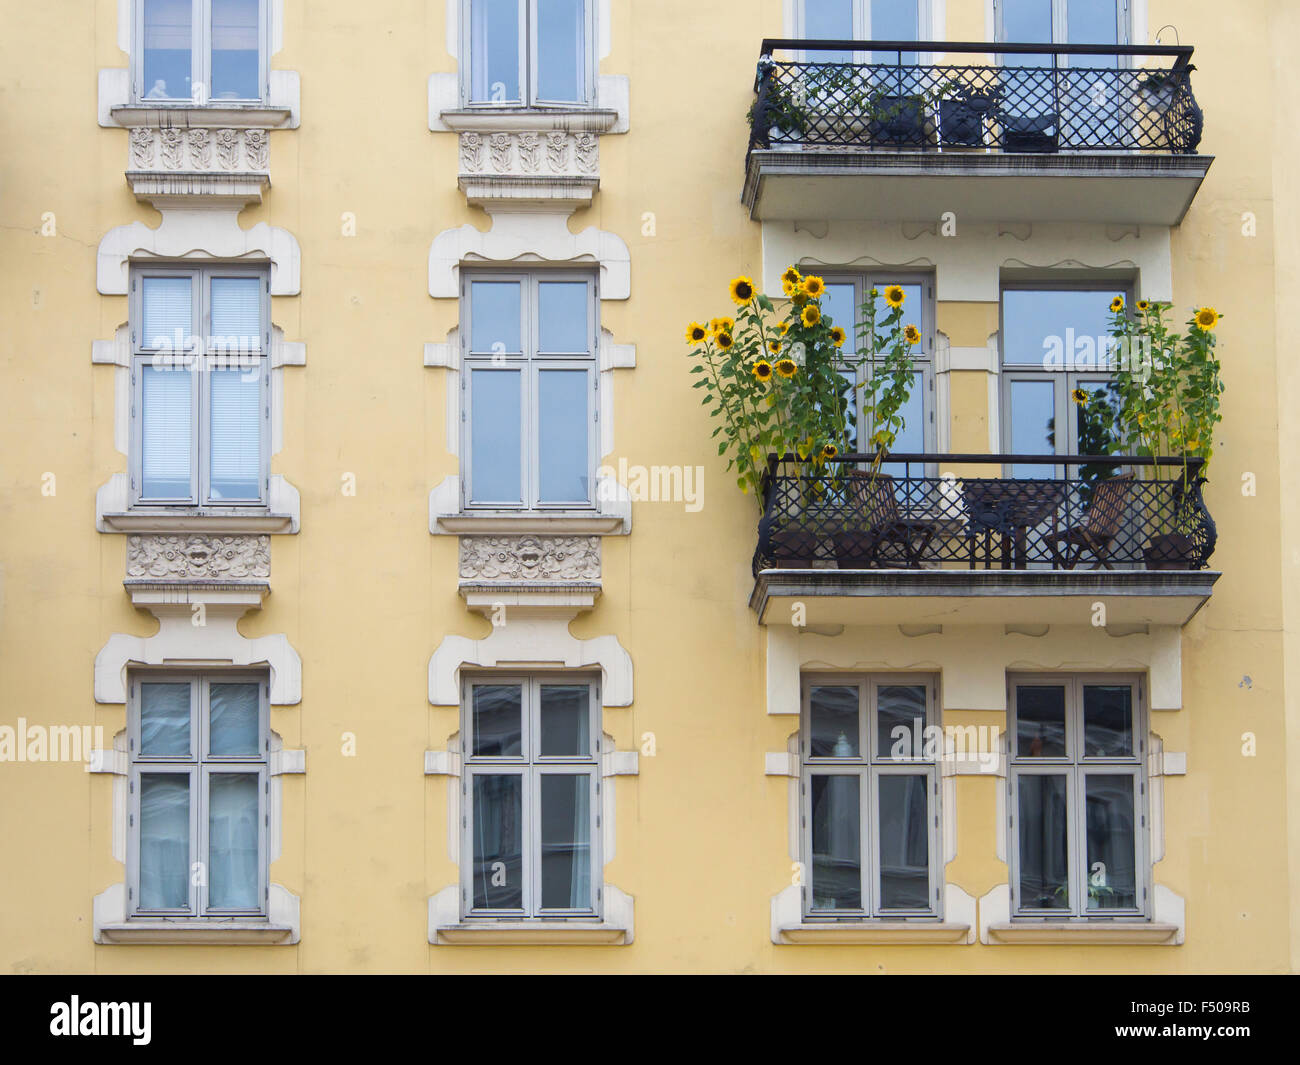 Old apartment building in central Oslo Norway,  facade with windows balconies and tall sunflowers Stock Photo